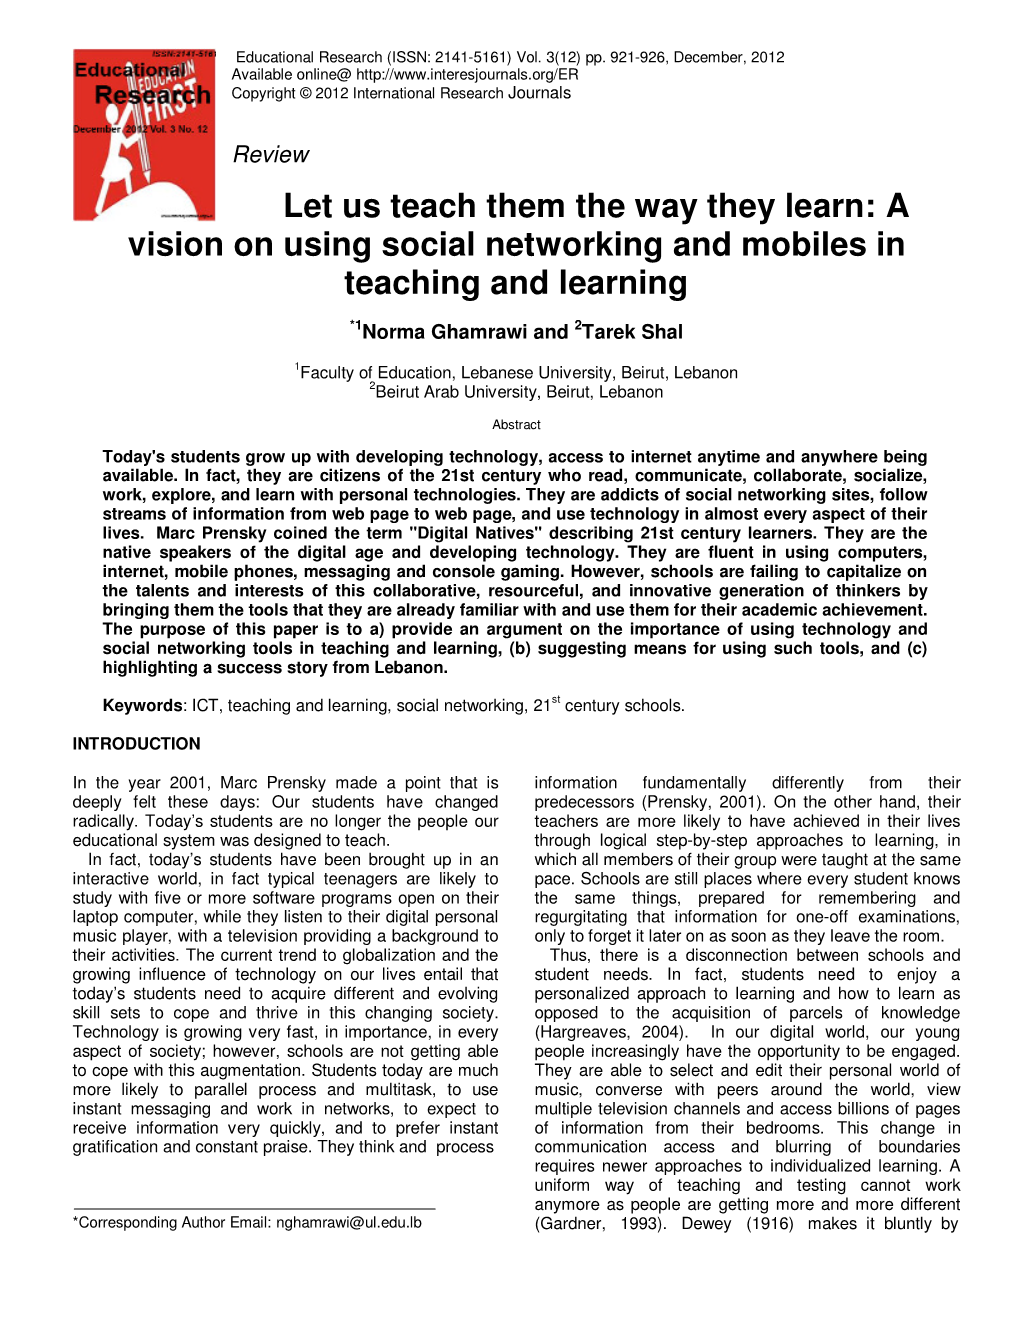 A Vision on Using Social Networking and Mobiles in Teaching and Learning